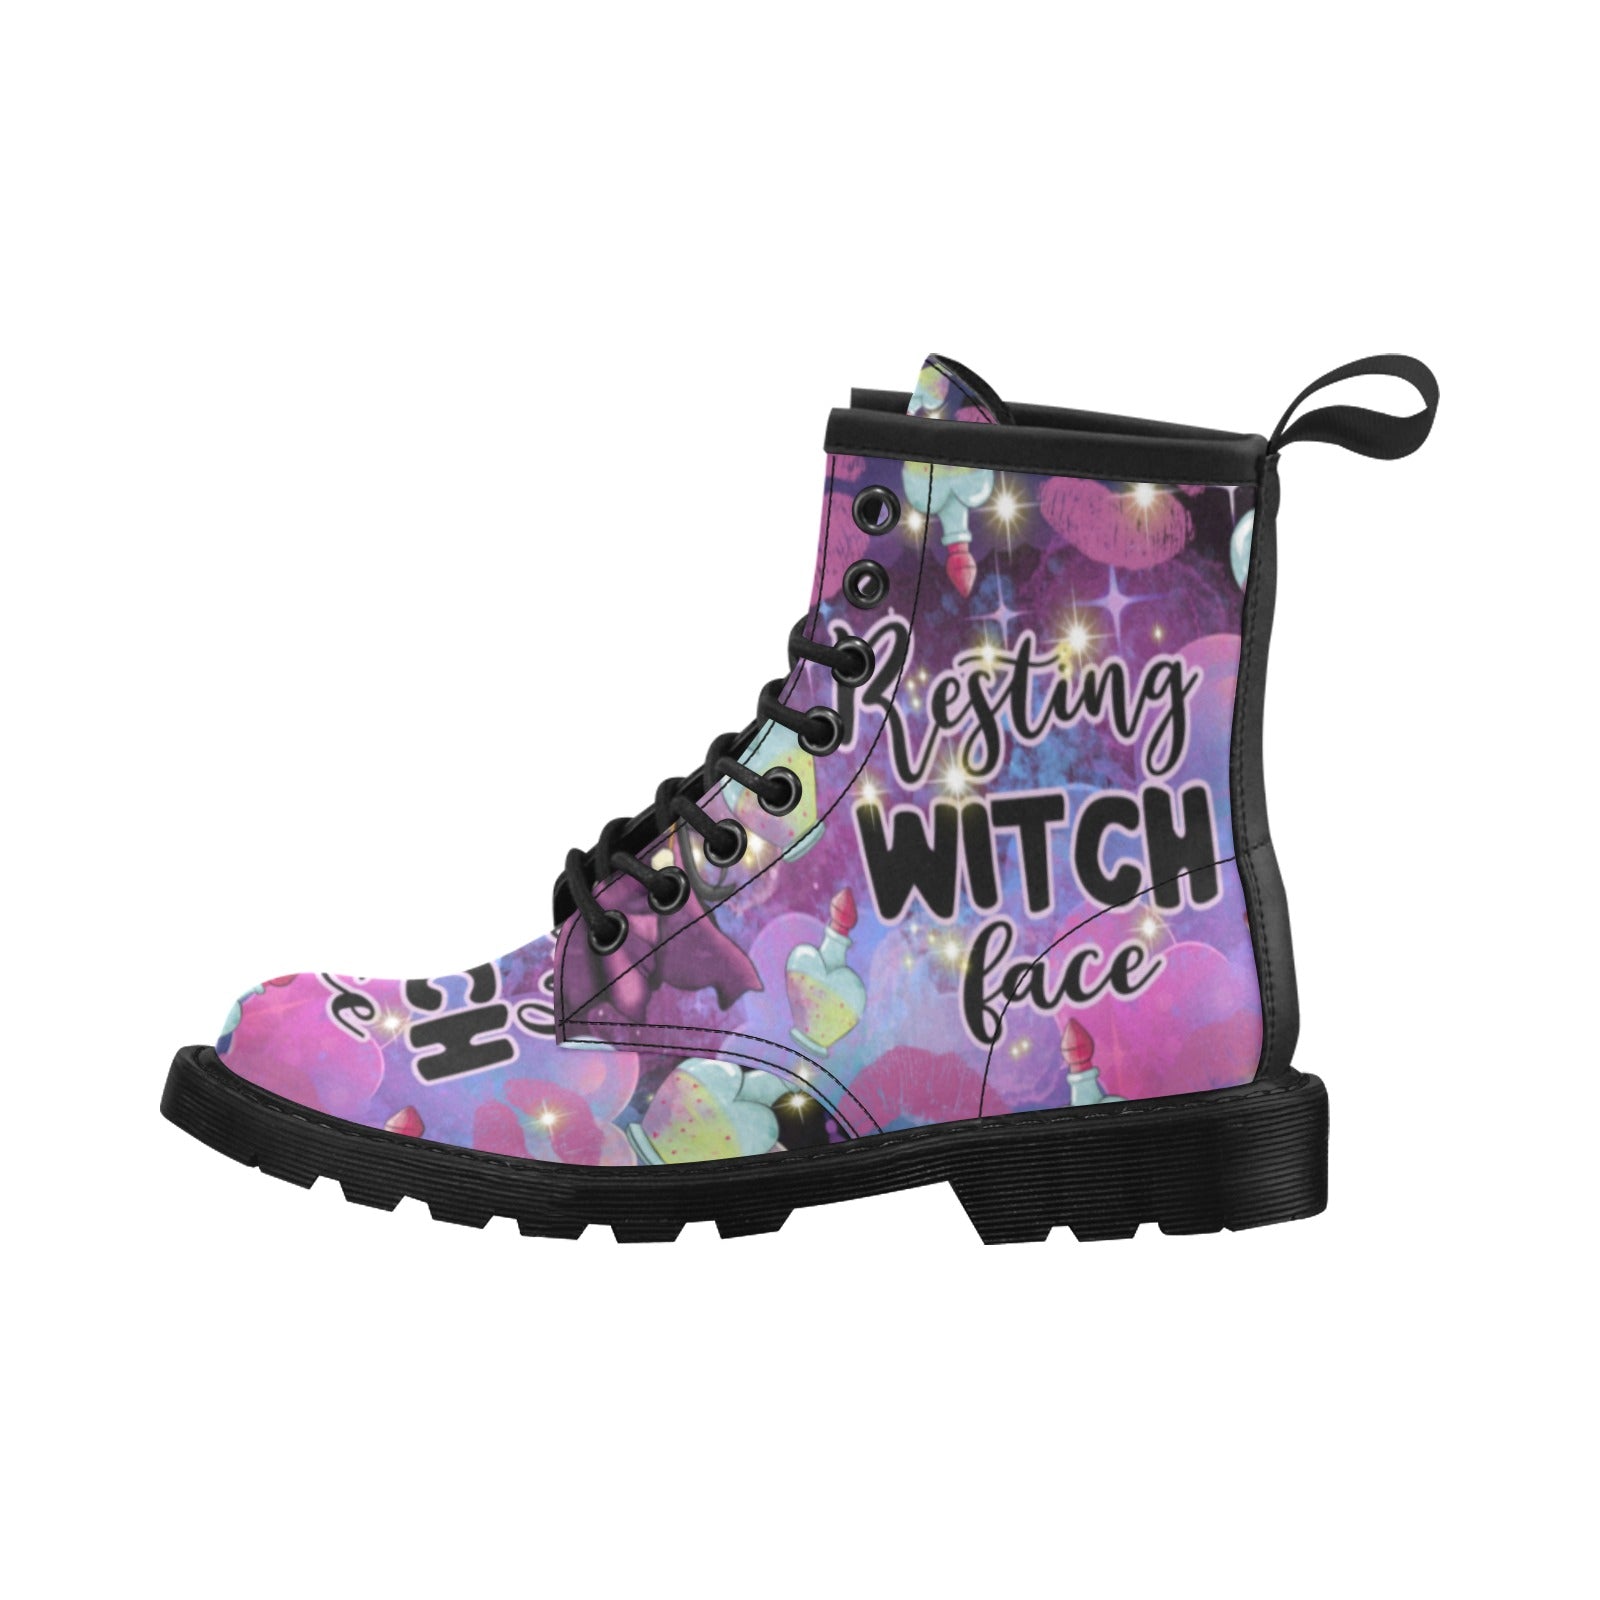 Resting witch face gothic Martin Boots-MoonChildWorld